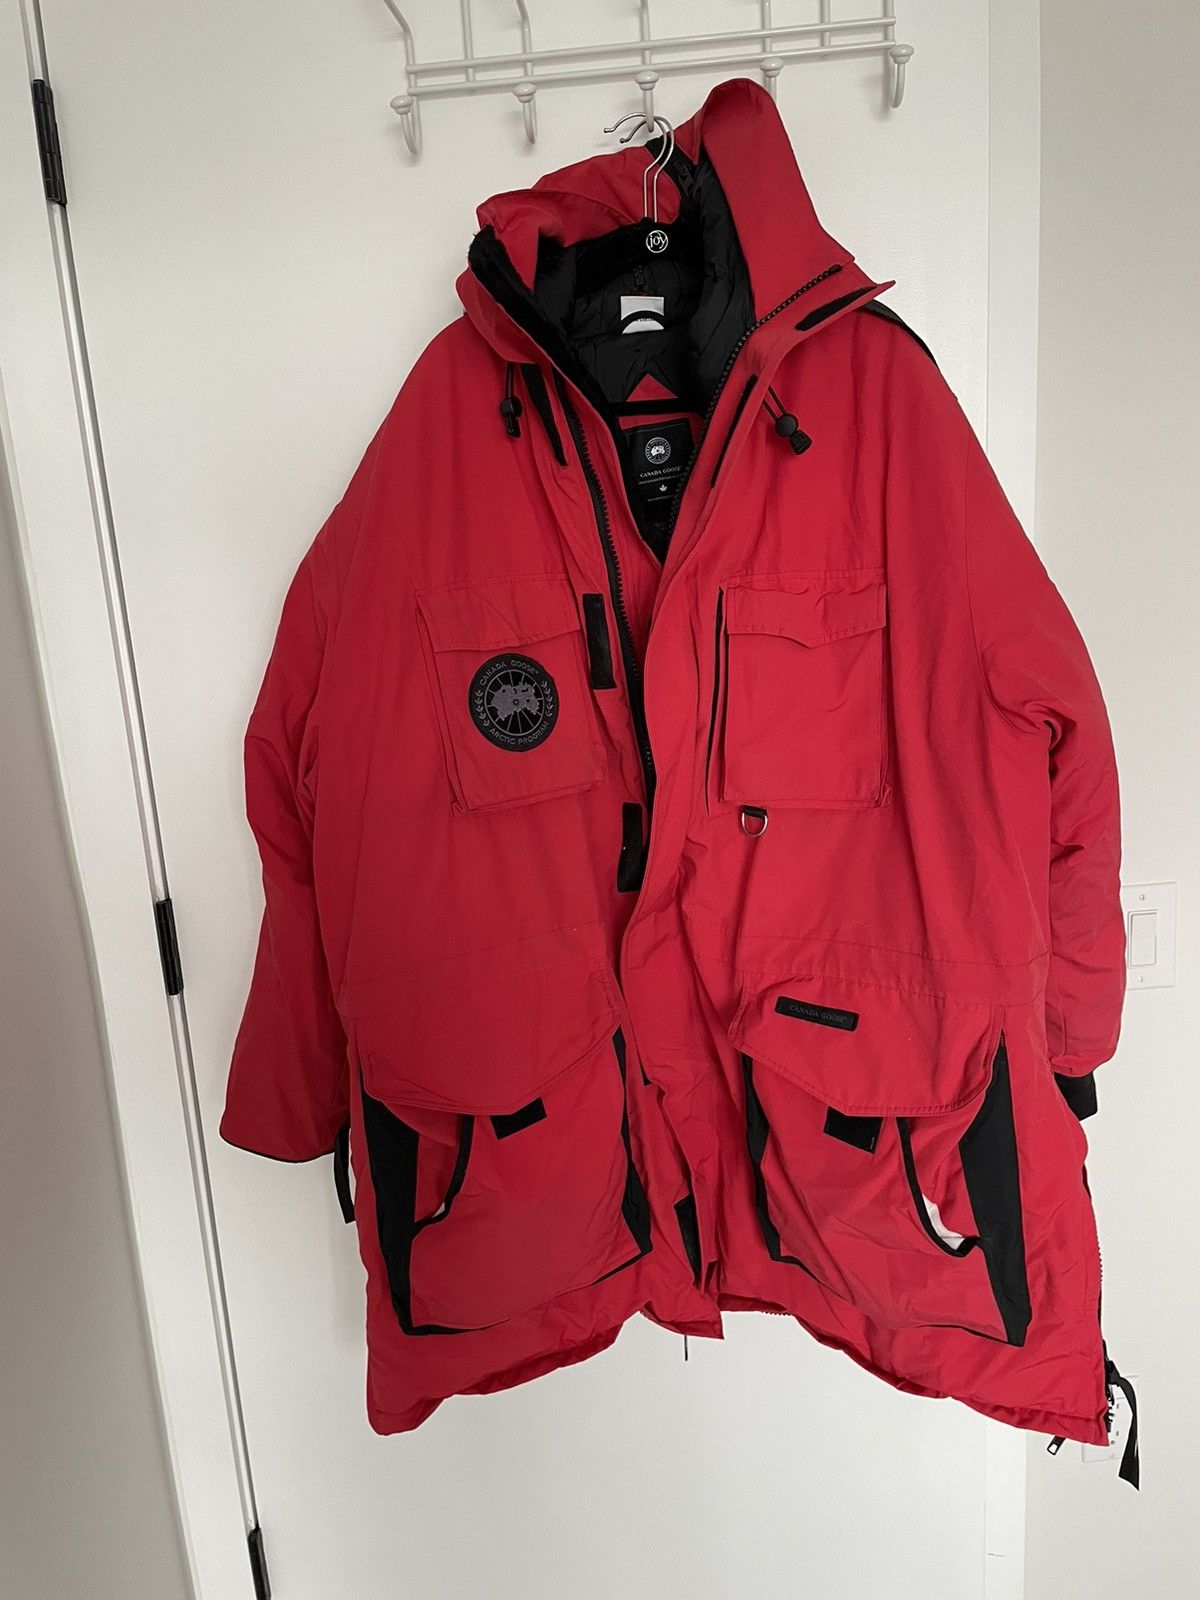 Canada Goose Vetements x Canada Goose SS17 bomber jacket | Grailed